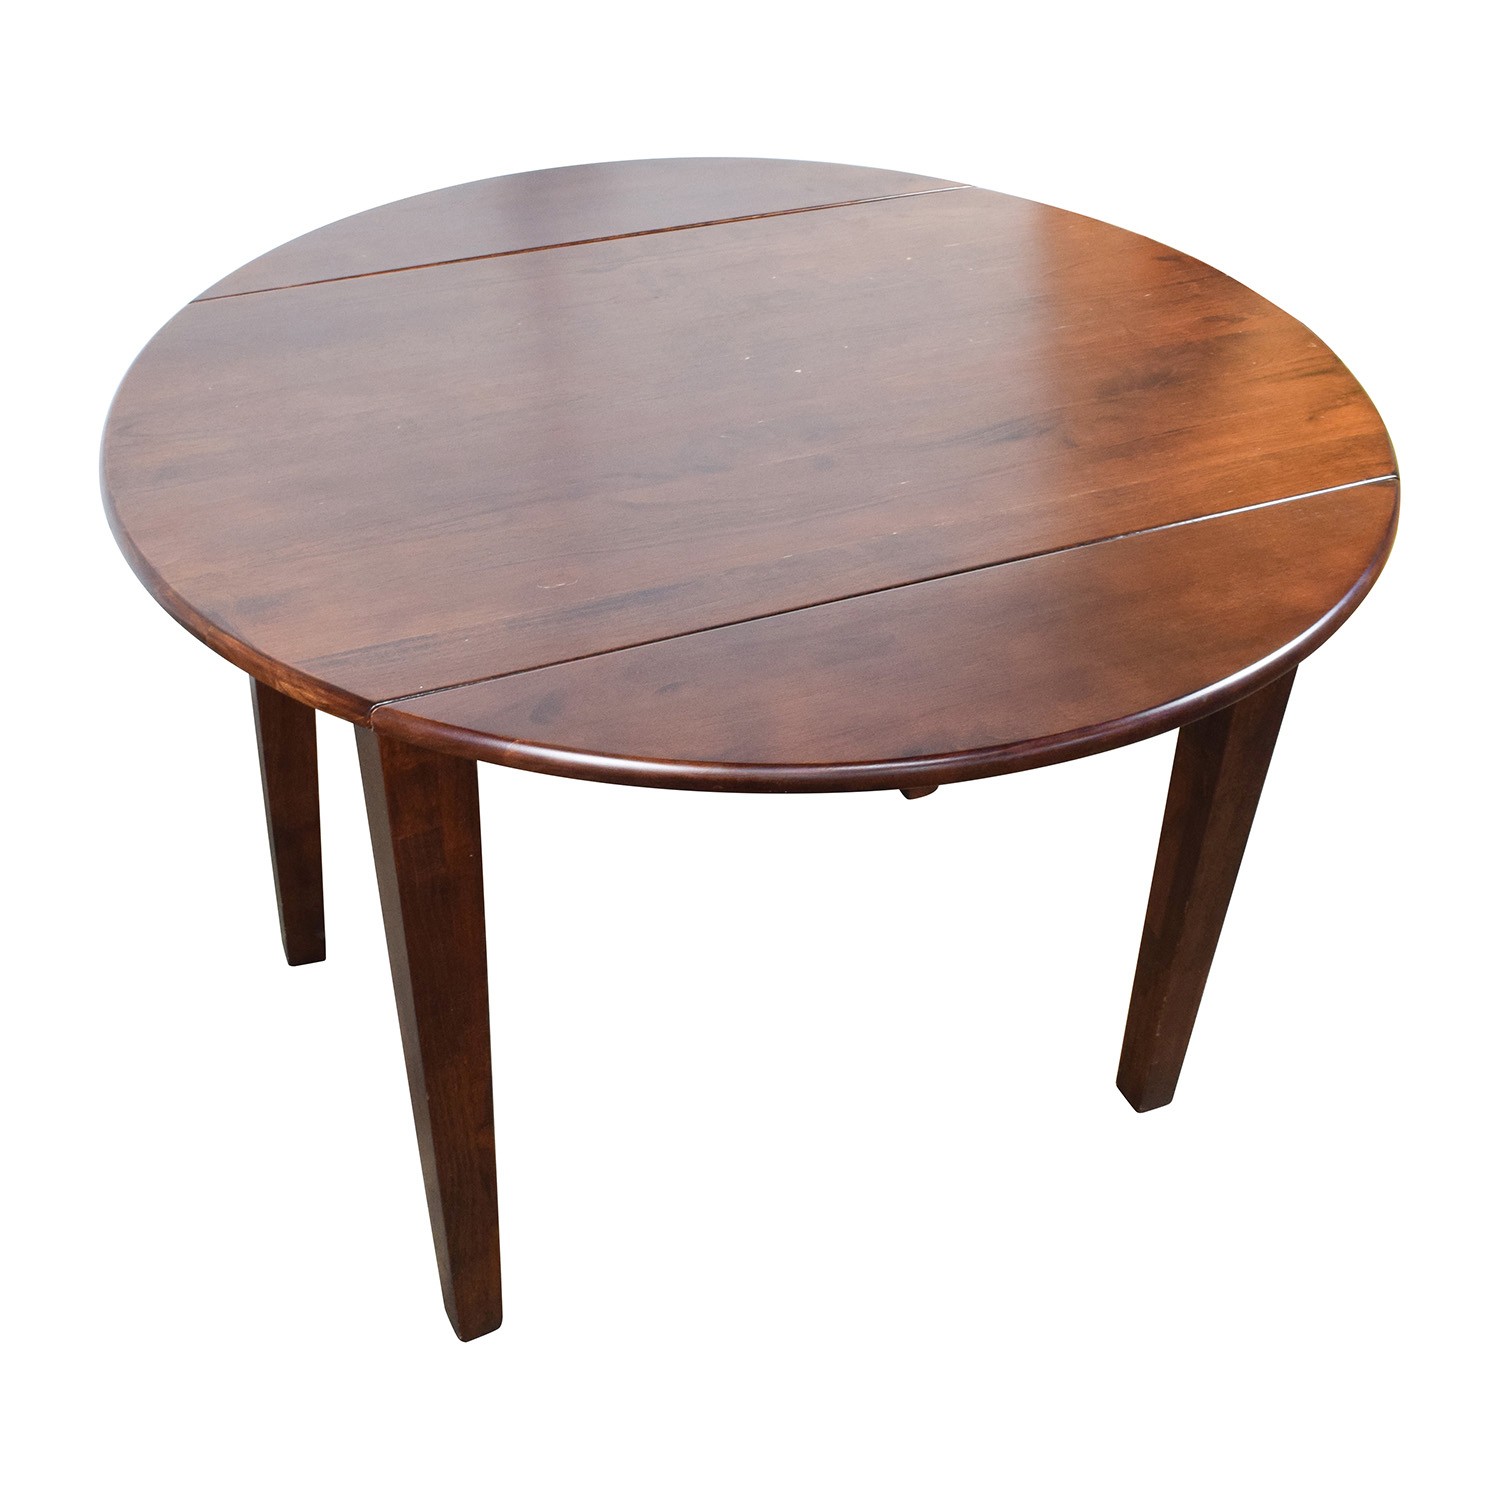 90 off round wood table with folding leaves tables 1